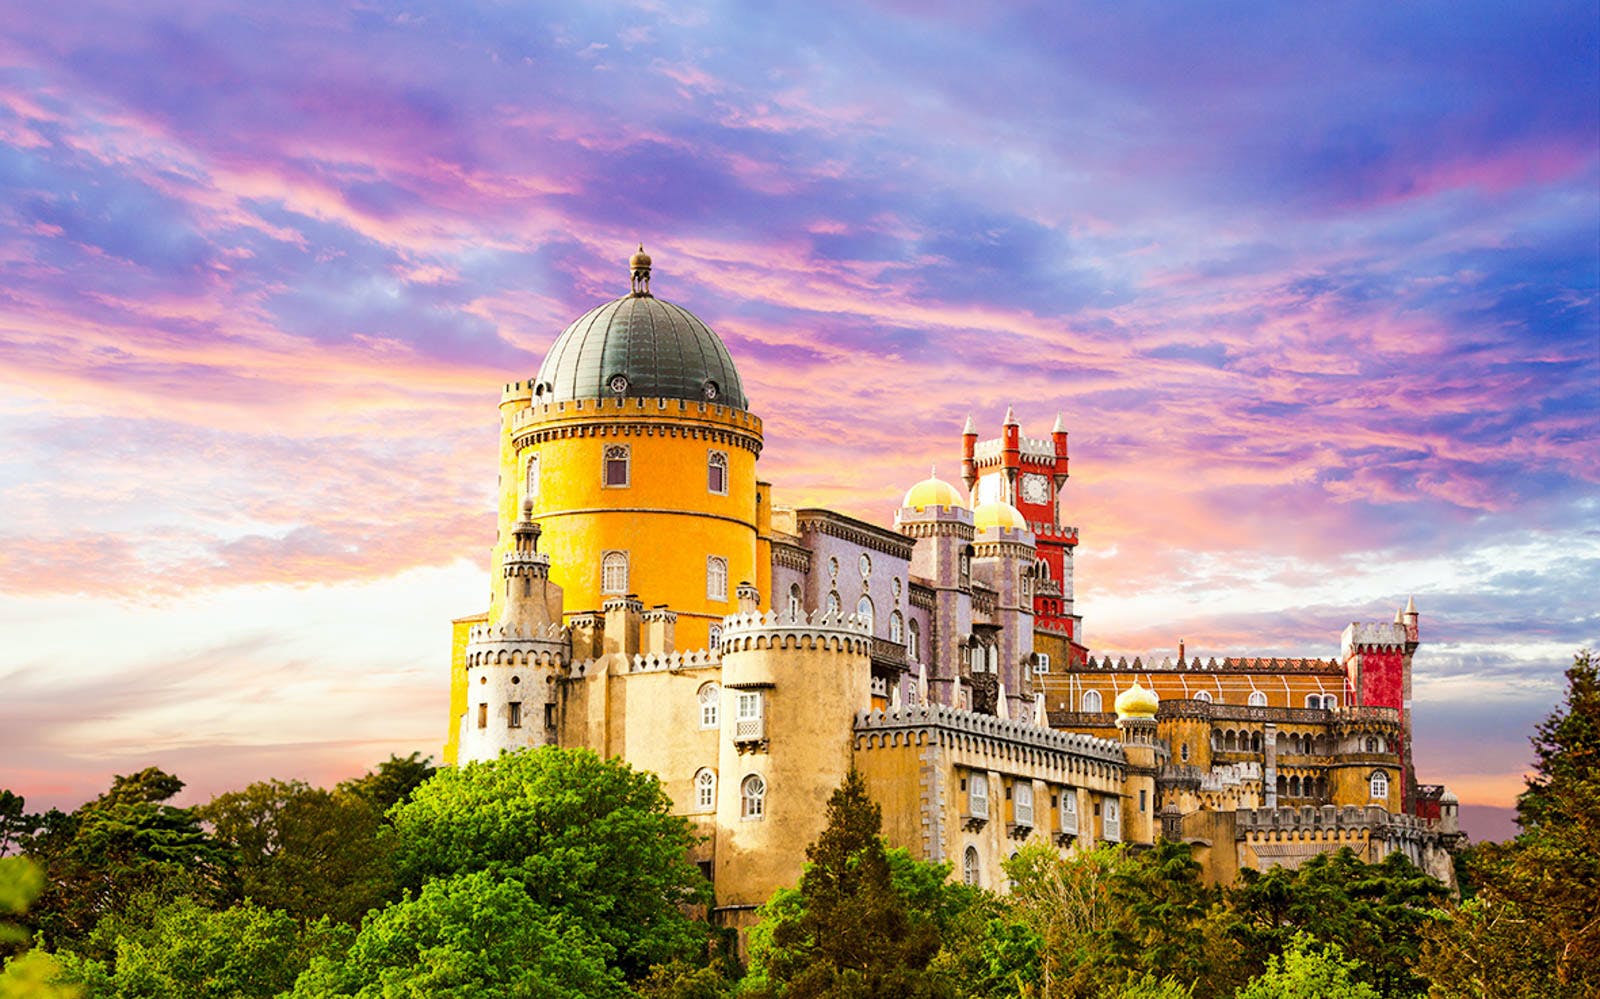 Can You Pass This 40-Question Geography Test That Gets Progressively Harder With Each Question? National Palace of Pena, Sintra, Portugal